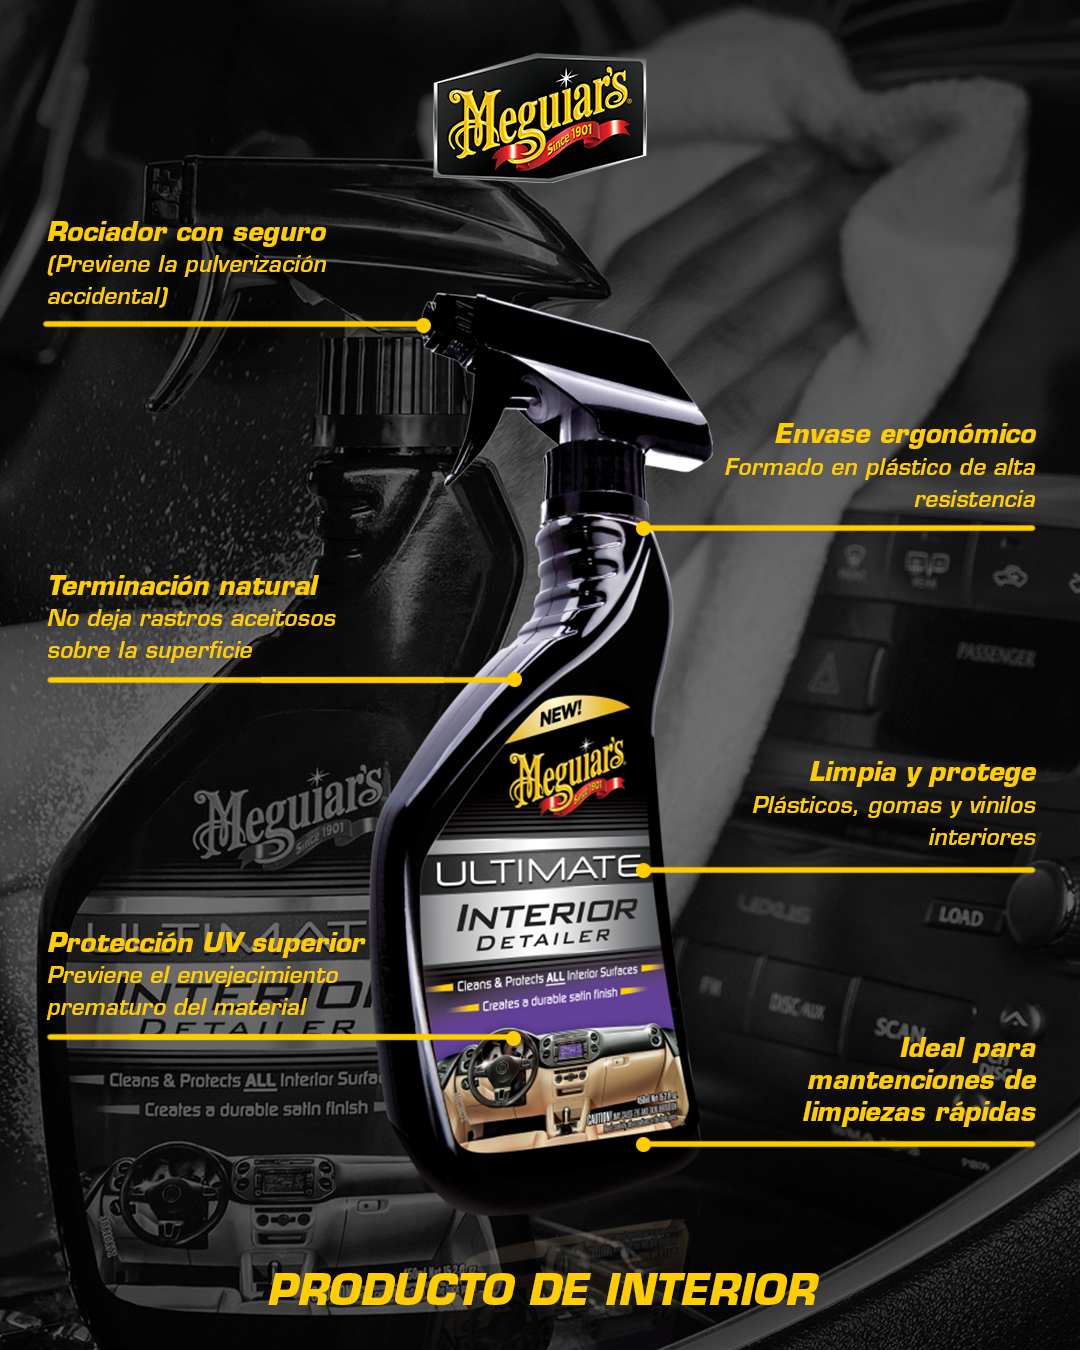 Meguiars Ultimate Interior Detailer 450ml for a satin finish